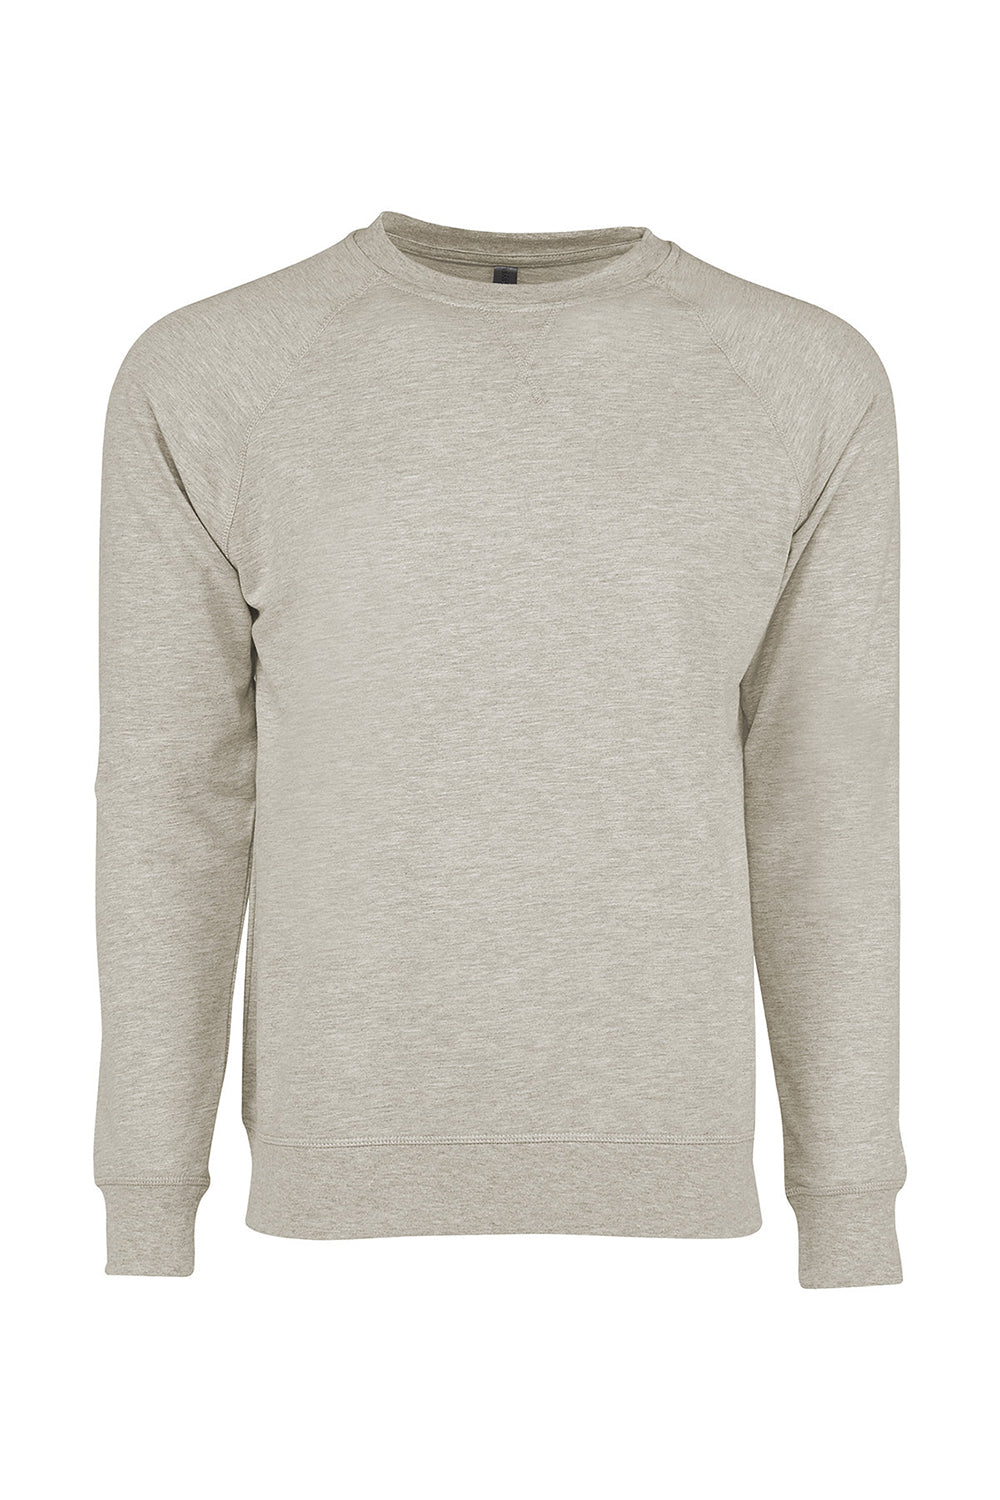 Next Level N9000/9000 Mens French Terry Long Sleeve Crewneck T-Shirt Oatmeal Flat Front